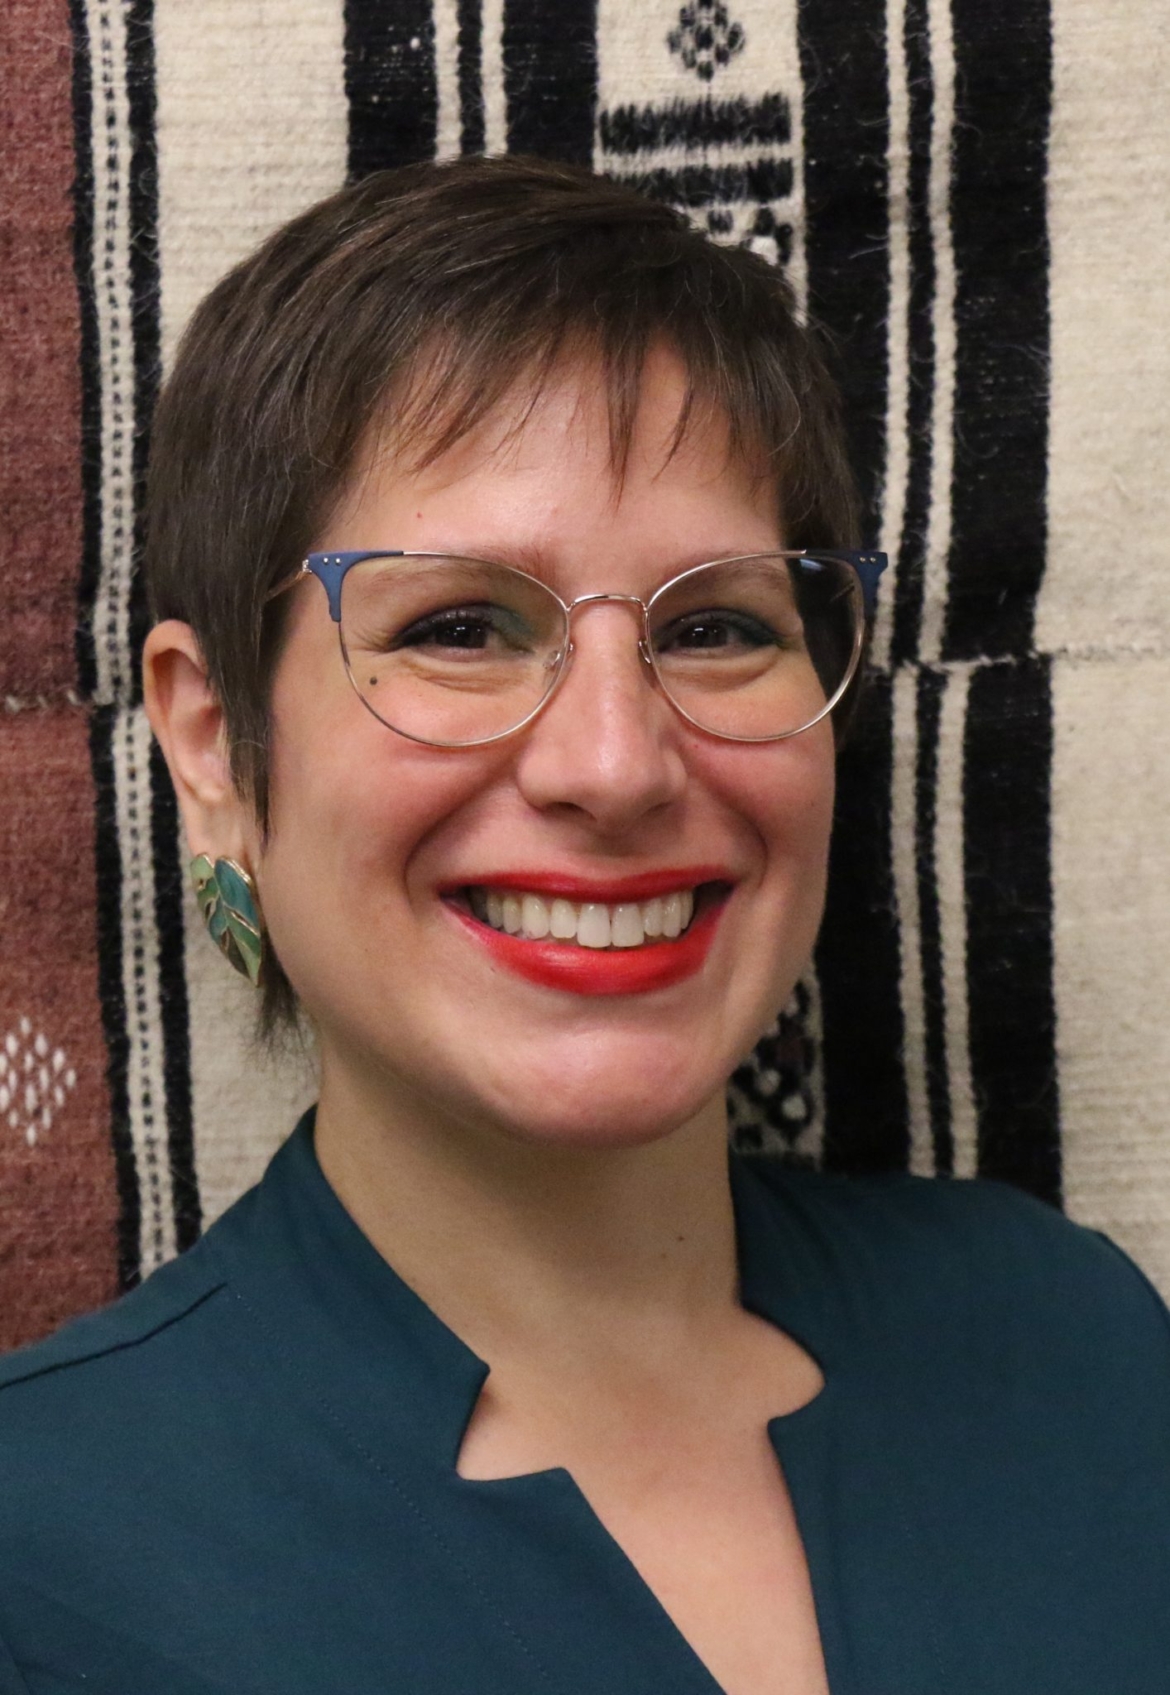 Raquel is smiling towards the camera. She is Latina with short brown hair, glasses, & a dark green dress. She is standing in front of a handwoven tapestry with geometric designs